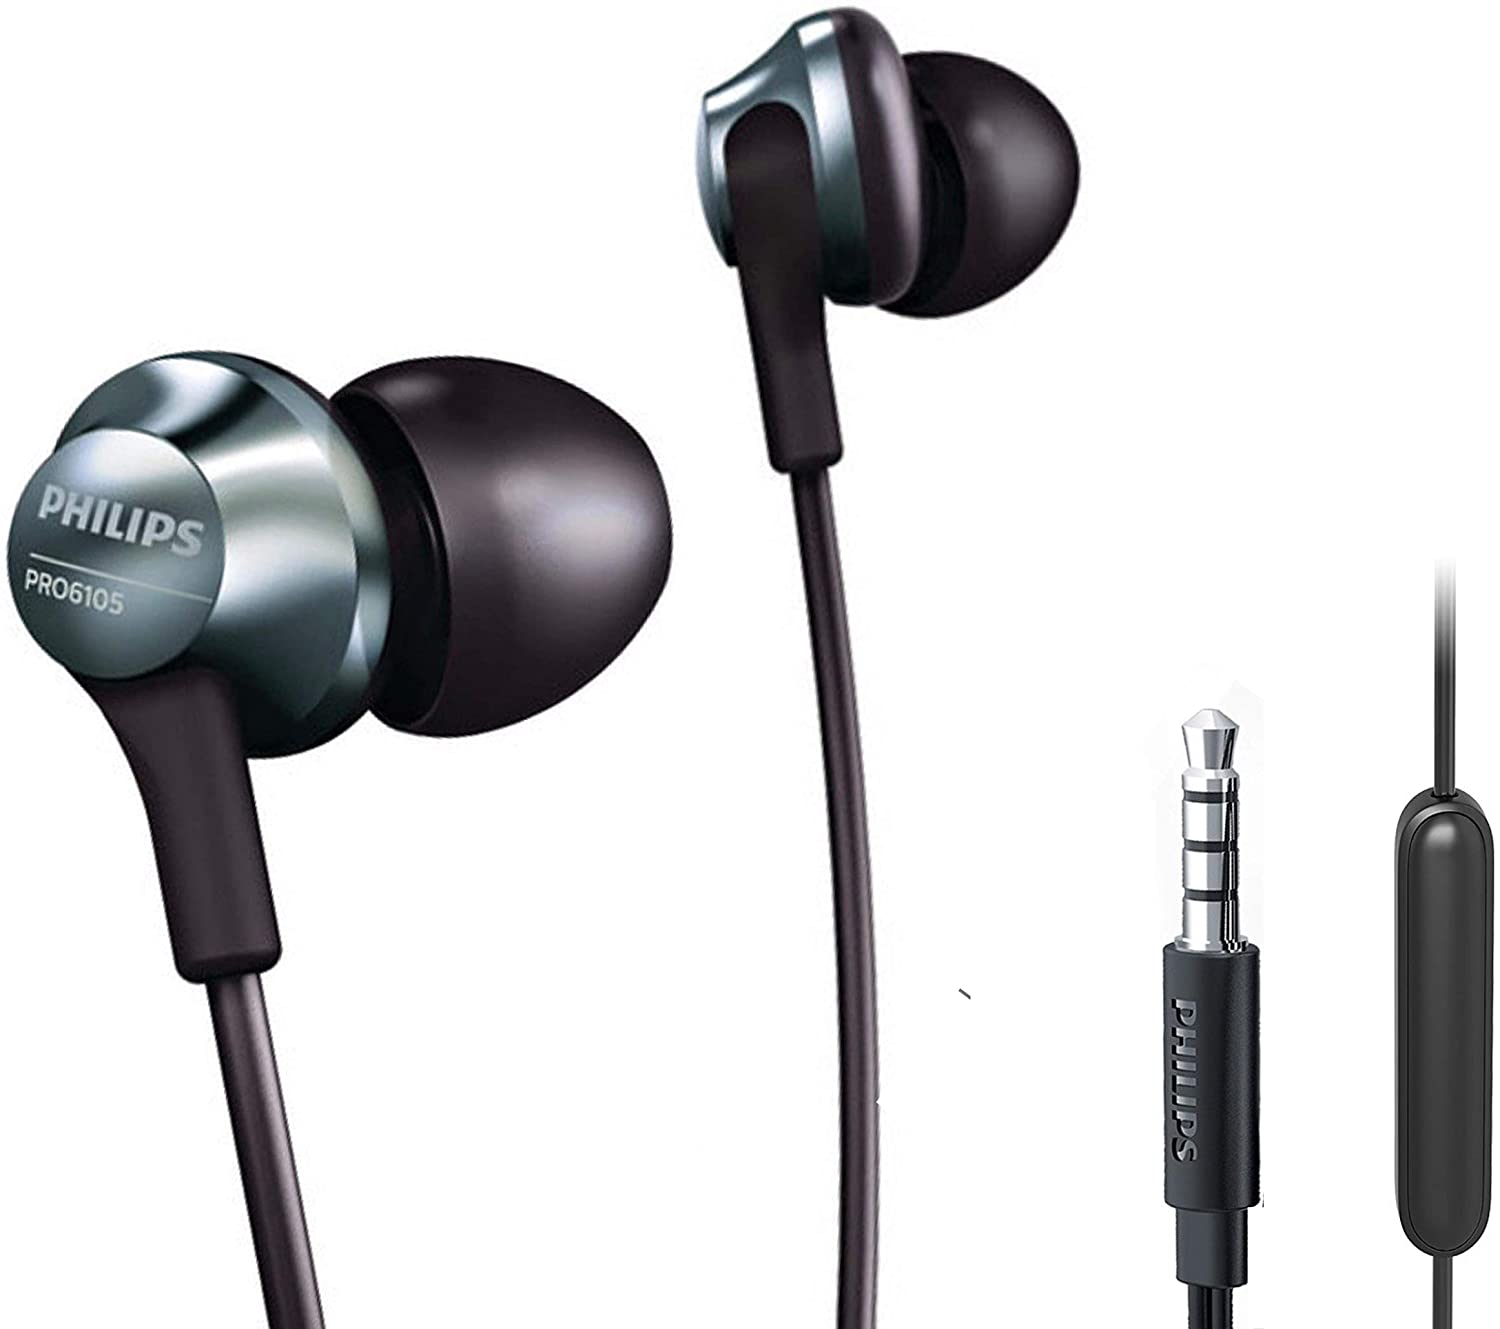 Philips Pro Wired Earbuds, Headphones with Mic, Powerful Bass, Lightweight, Hi-Res Audio 